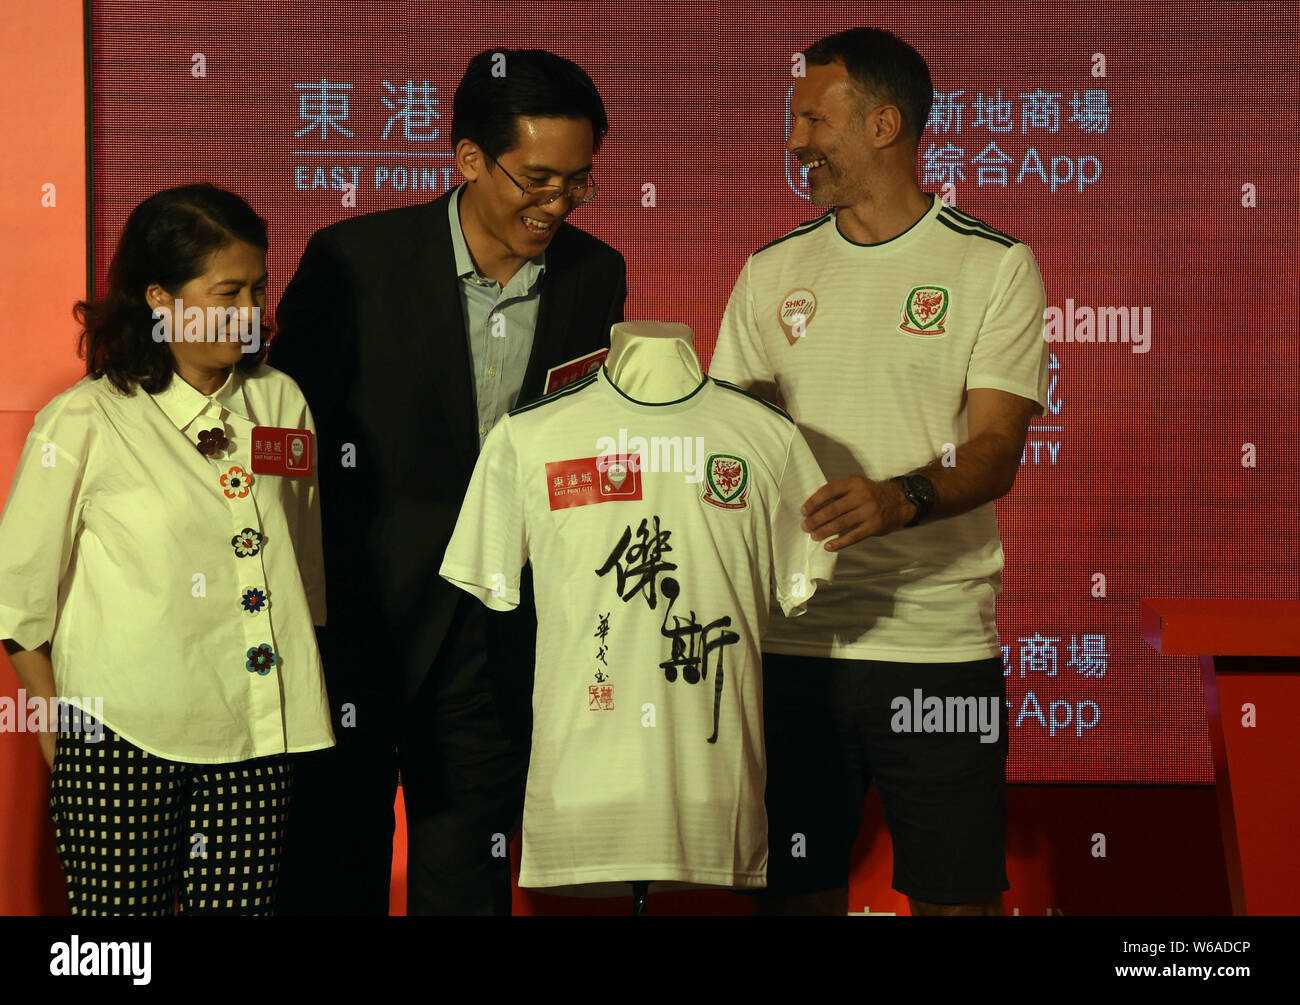 Welsh football coach and former football player Ryan Giggs attends a signing event in Hong Kong, China, 17 June 2018. Stock Photo